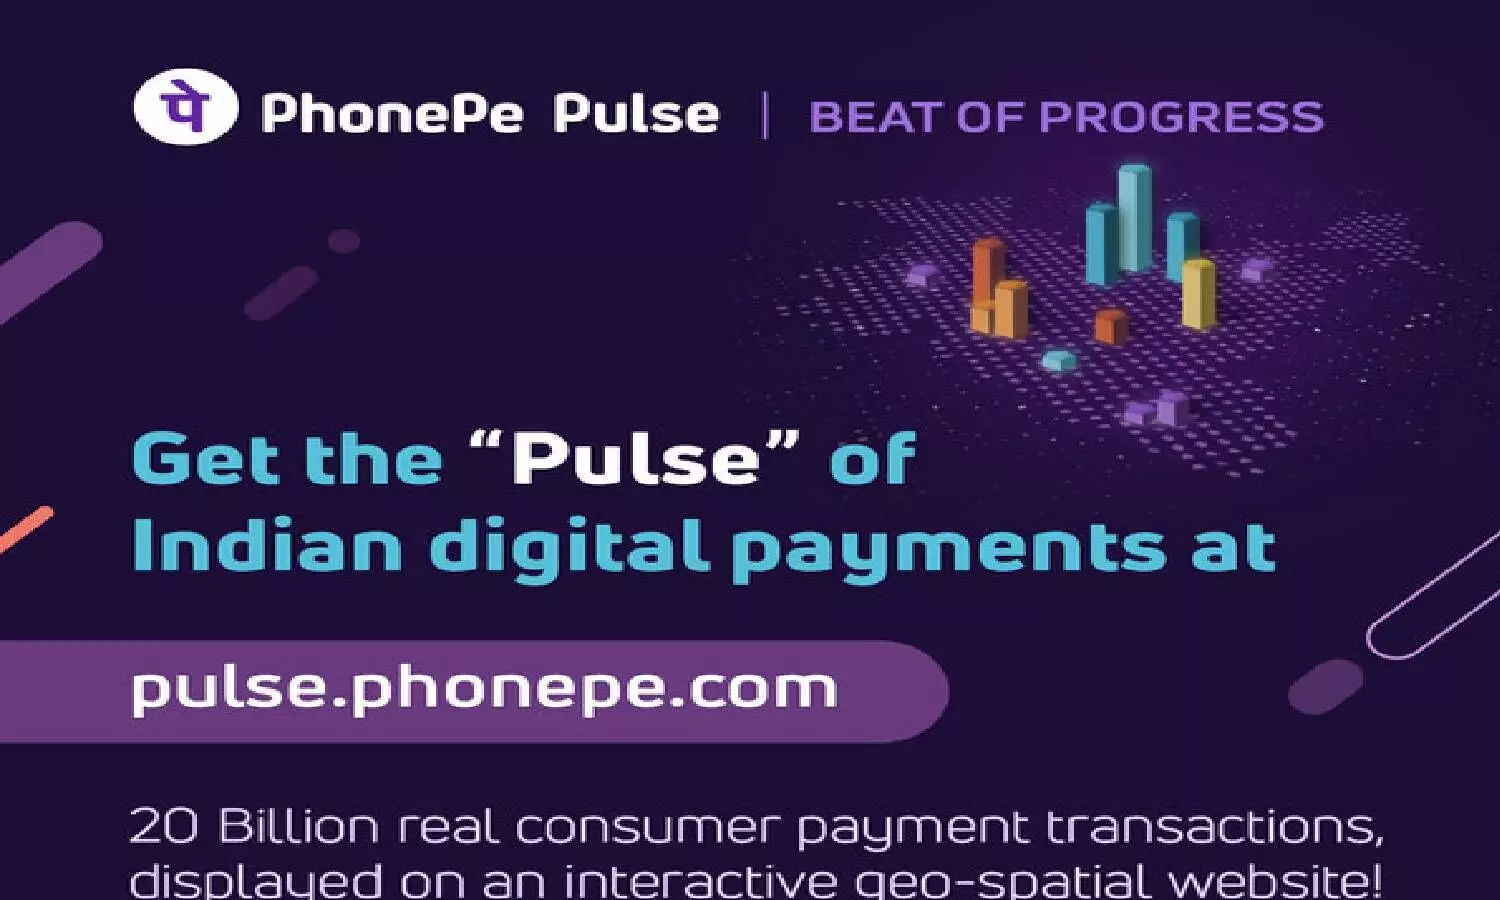 PhonePe launches India’s first geospatial website ‘Pulse’